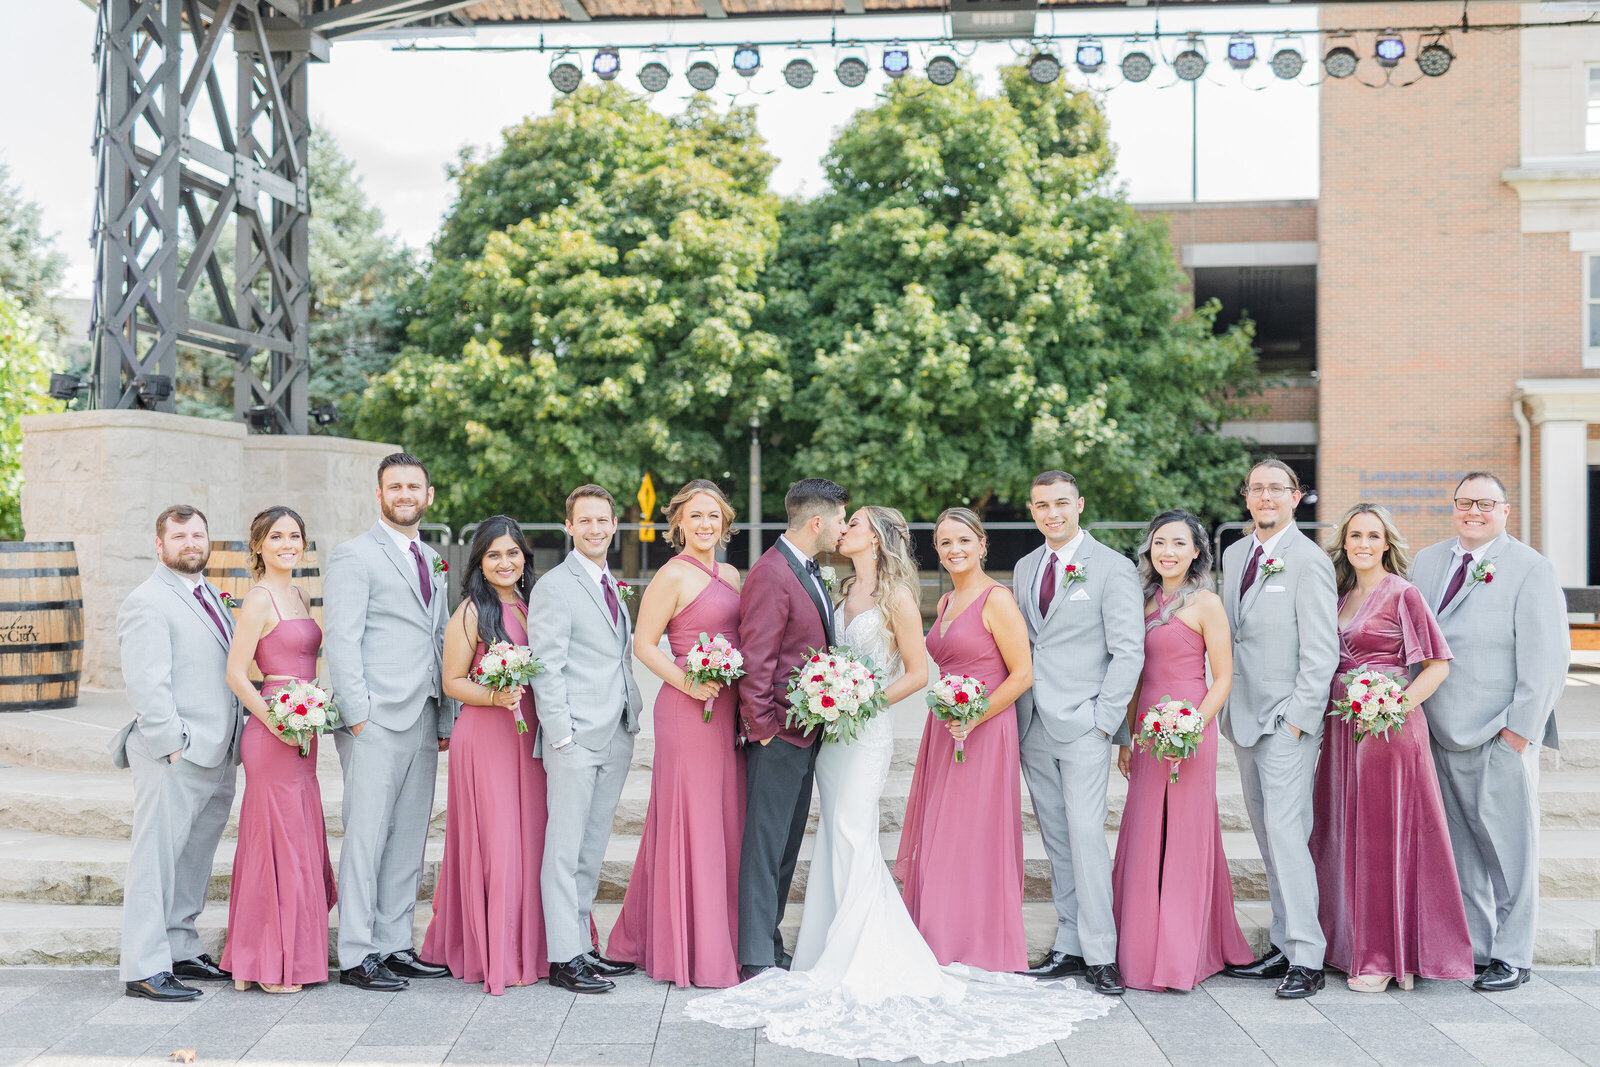 Bride and groom share a kiss in the middle of their bridal party in downtown Lawrenceburg. Taken by an Indiana Wedding Photographer